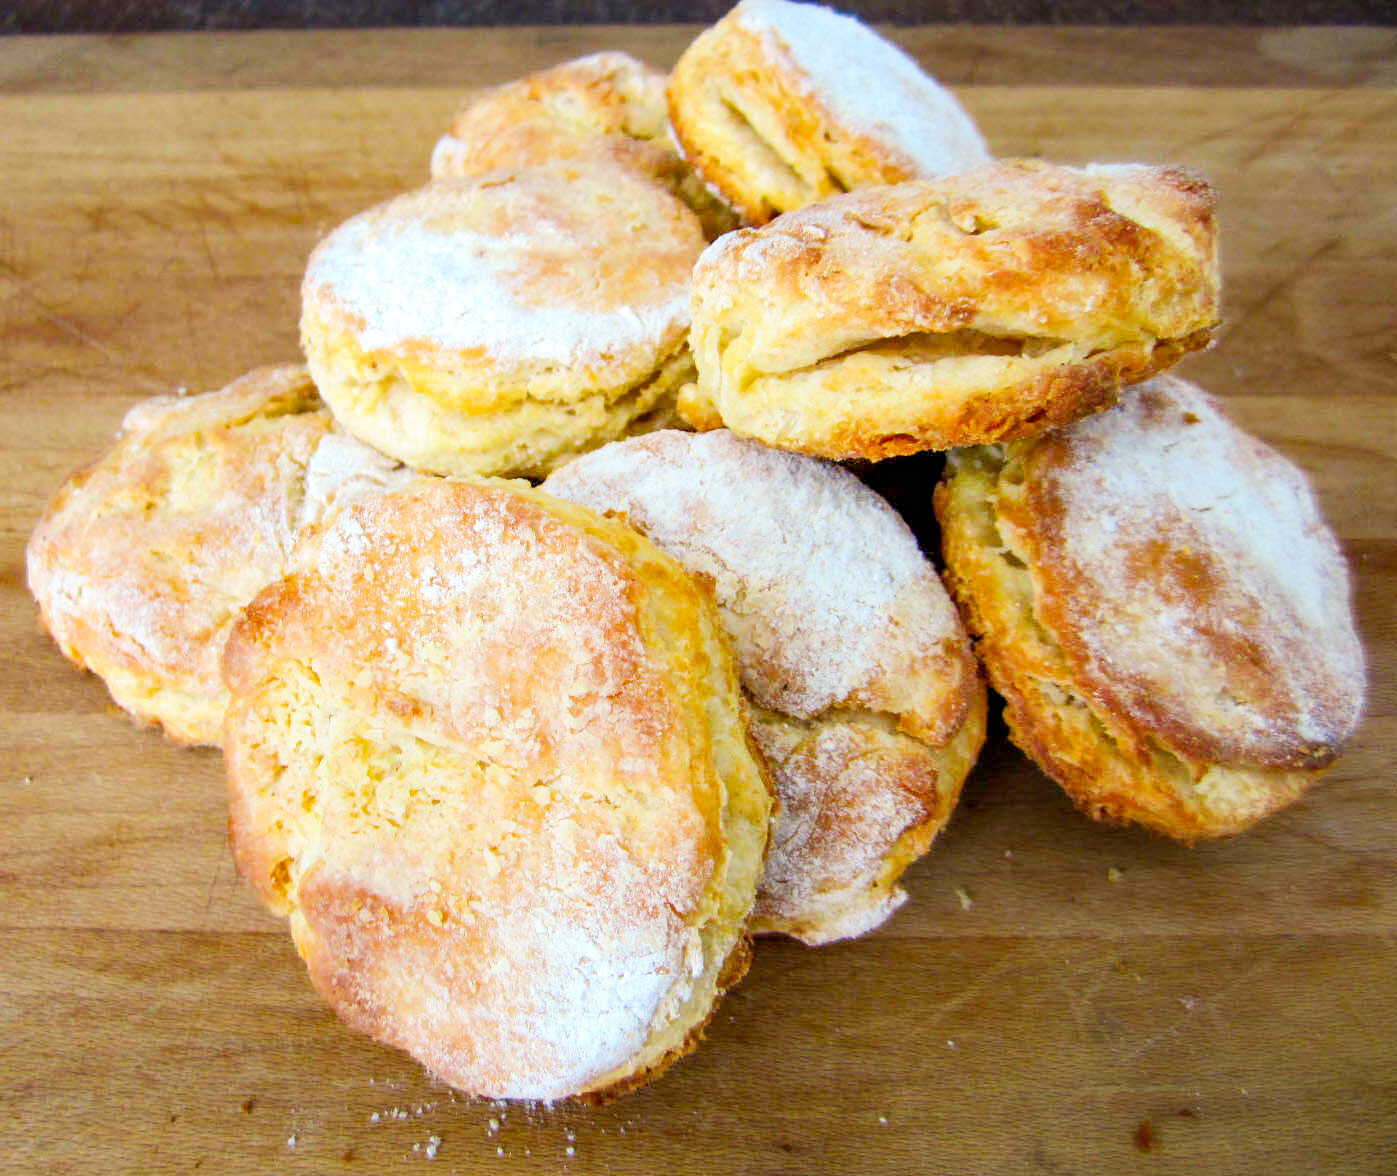 cooked biscuits in a pile on a wooden board